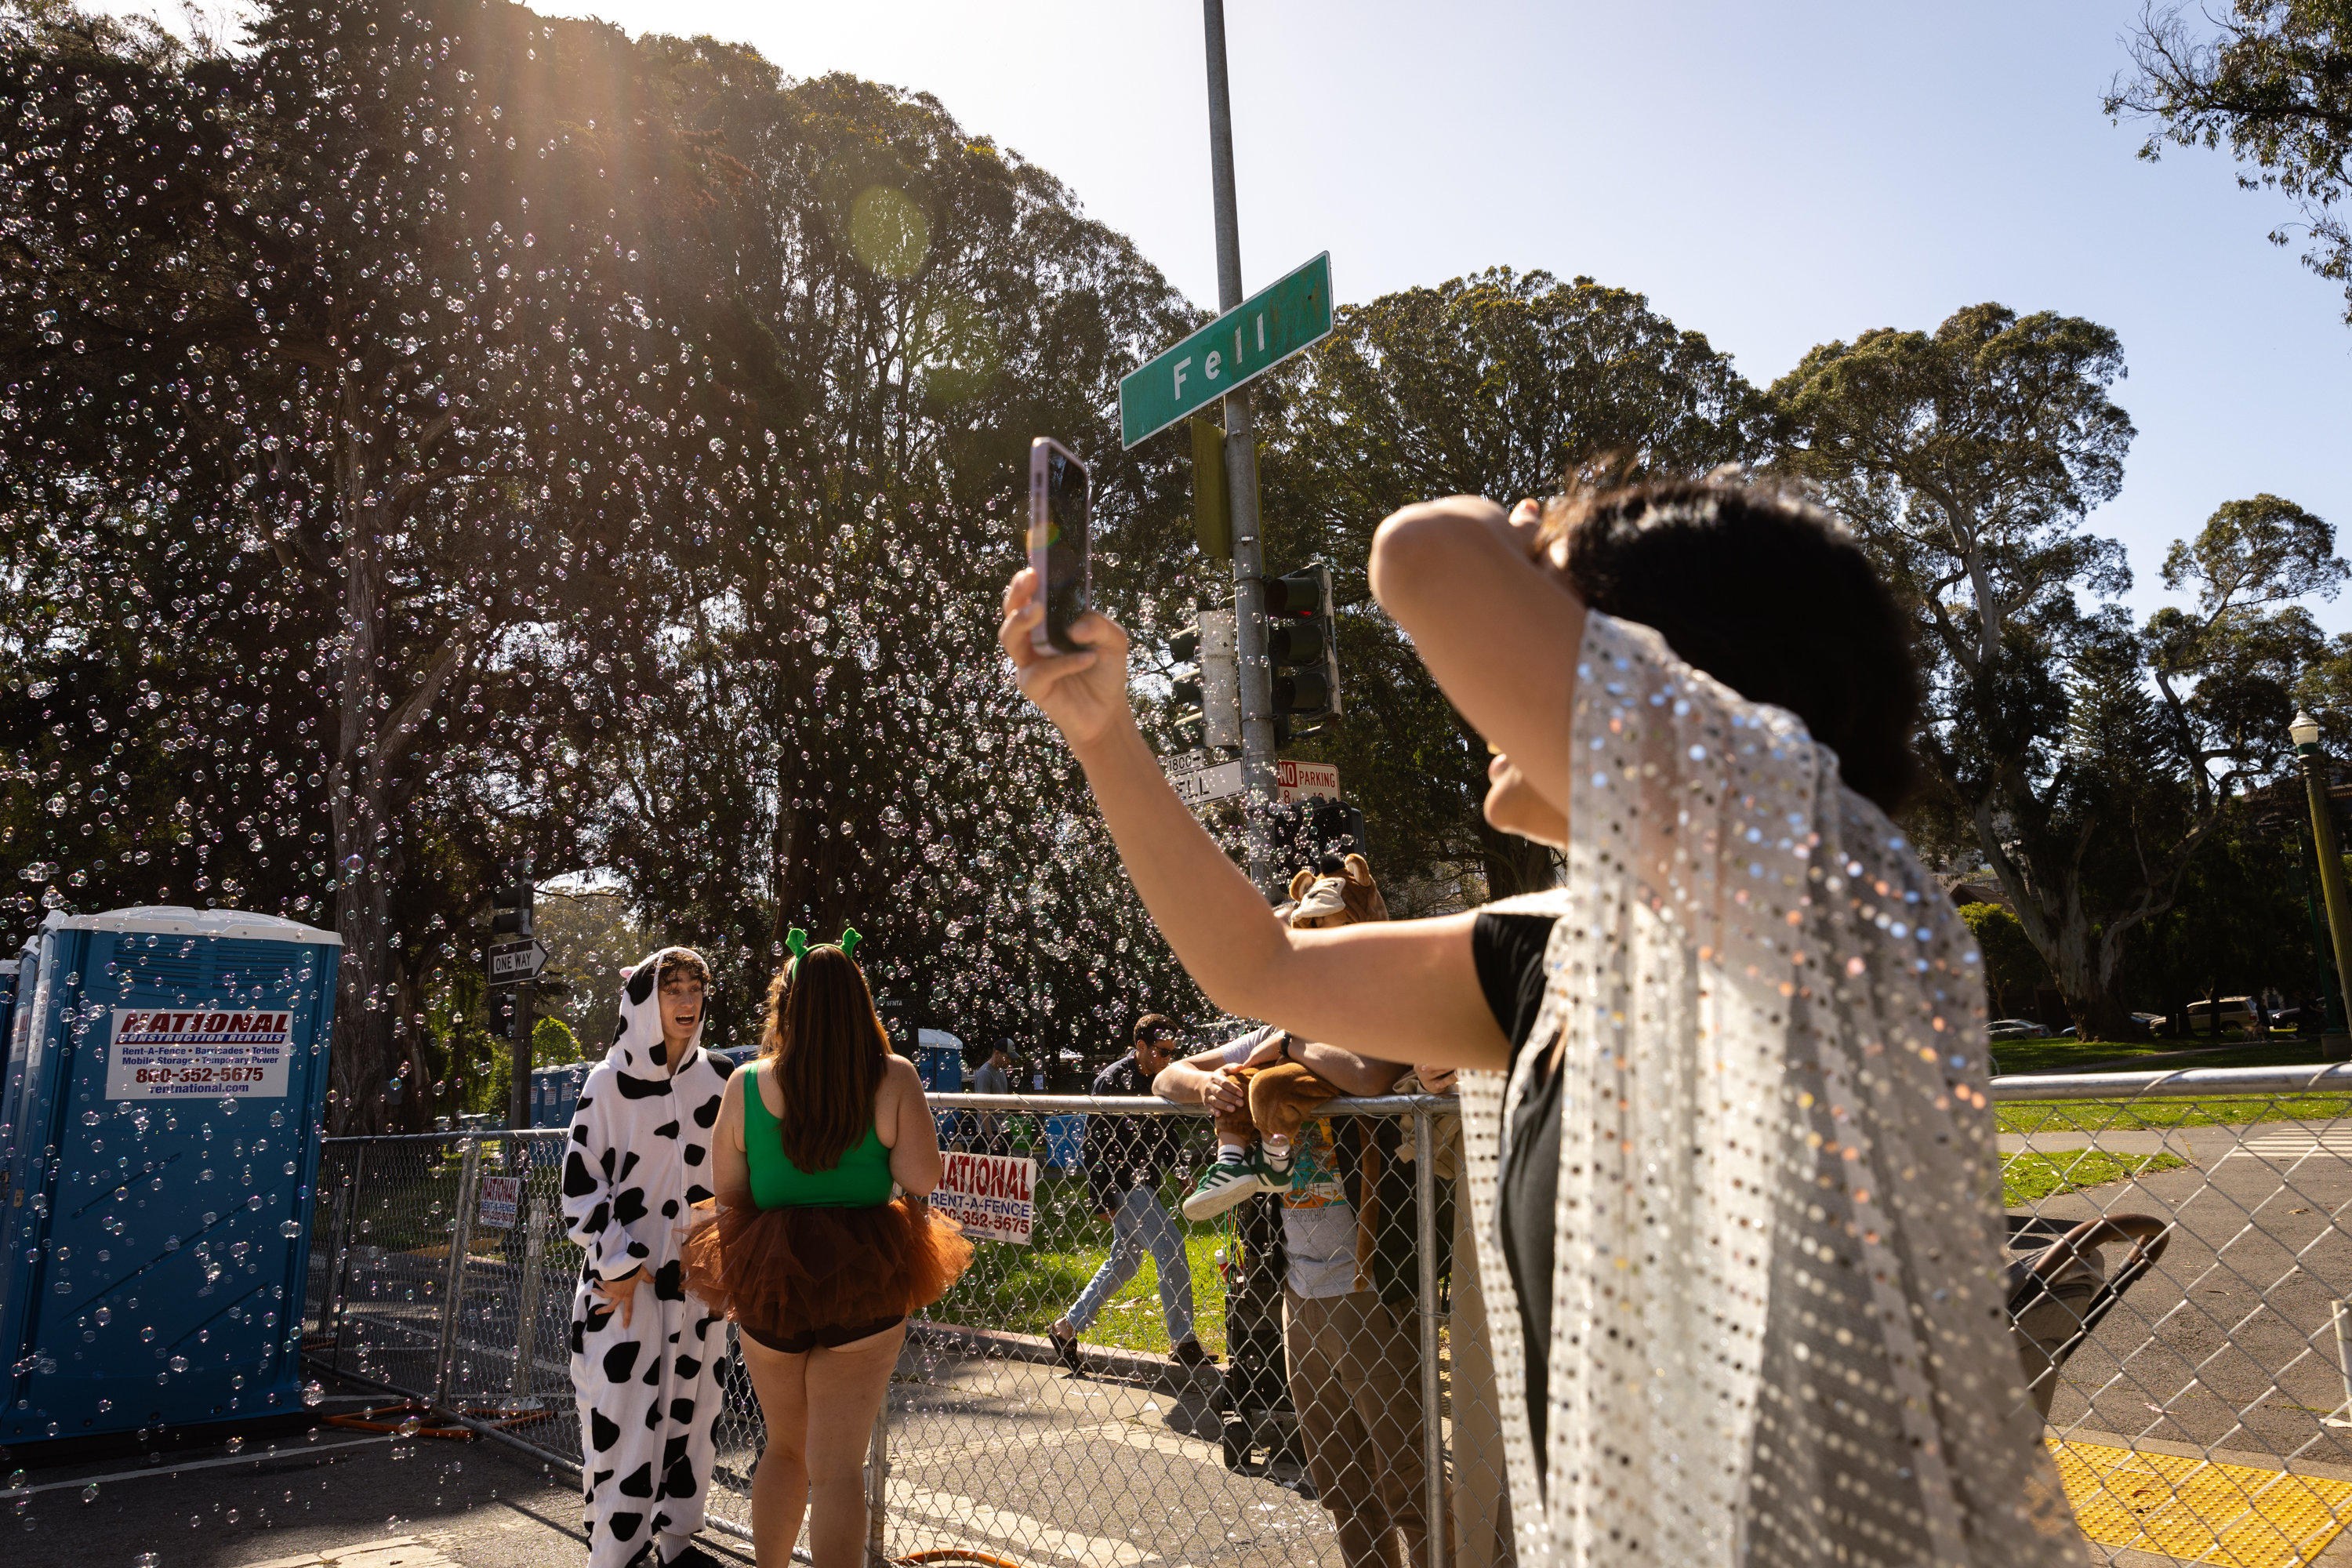 A crowd enjoys a sunny outdoor event, recording a flurry of bubbles in the air. People in playful costumes add festivity to the scene under a street sign labeled &quot;Fell.&quot;